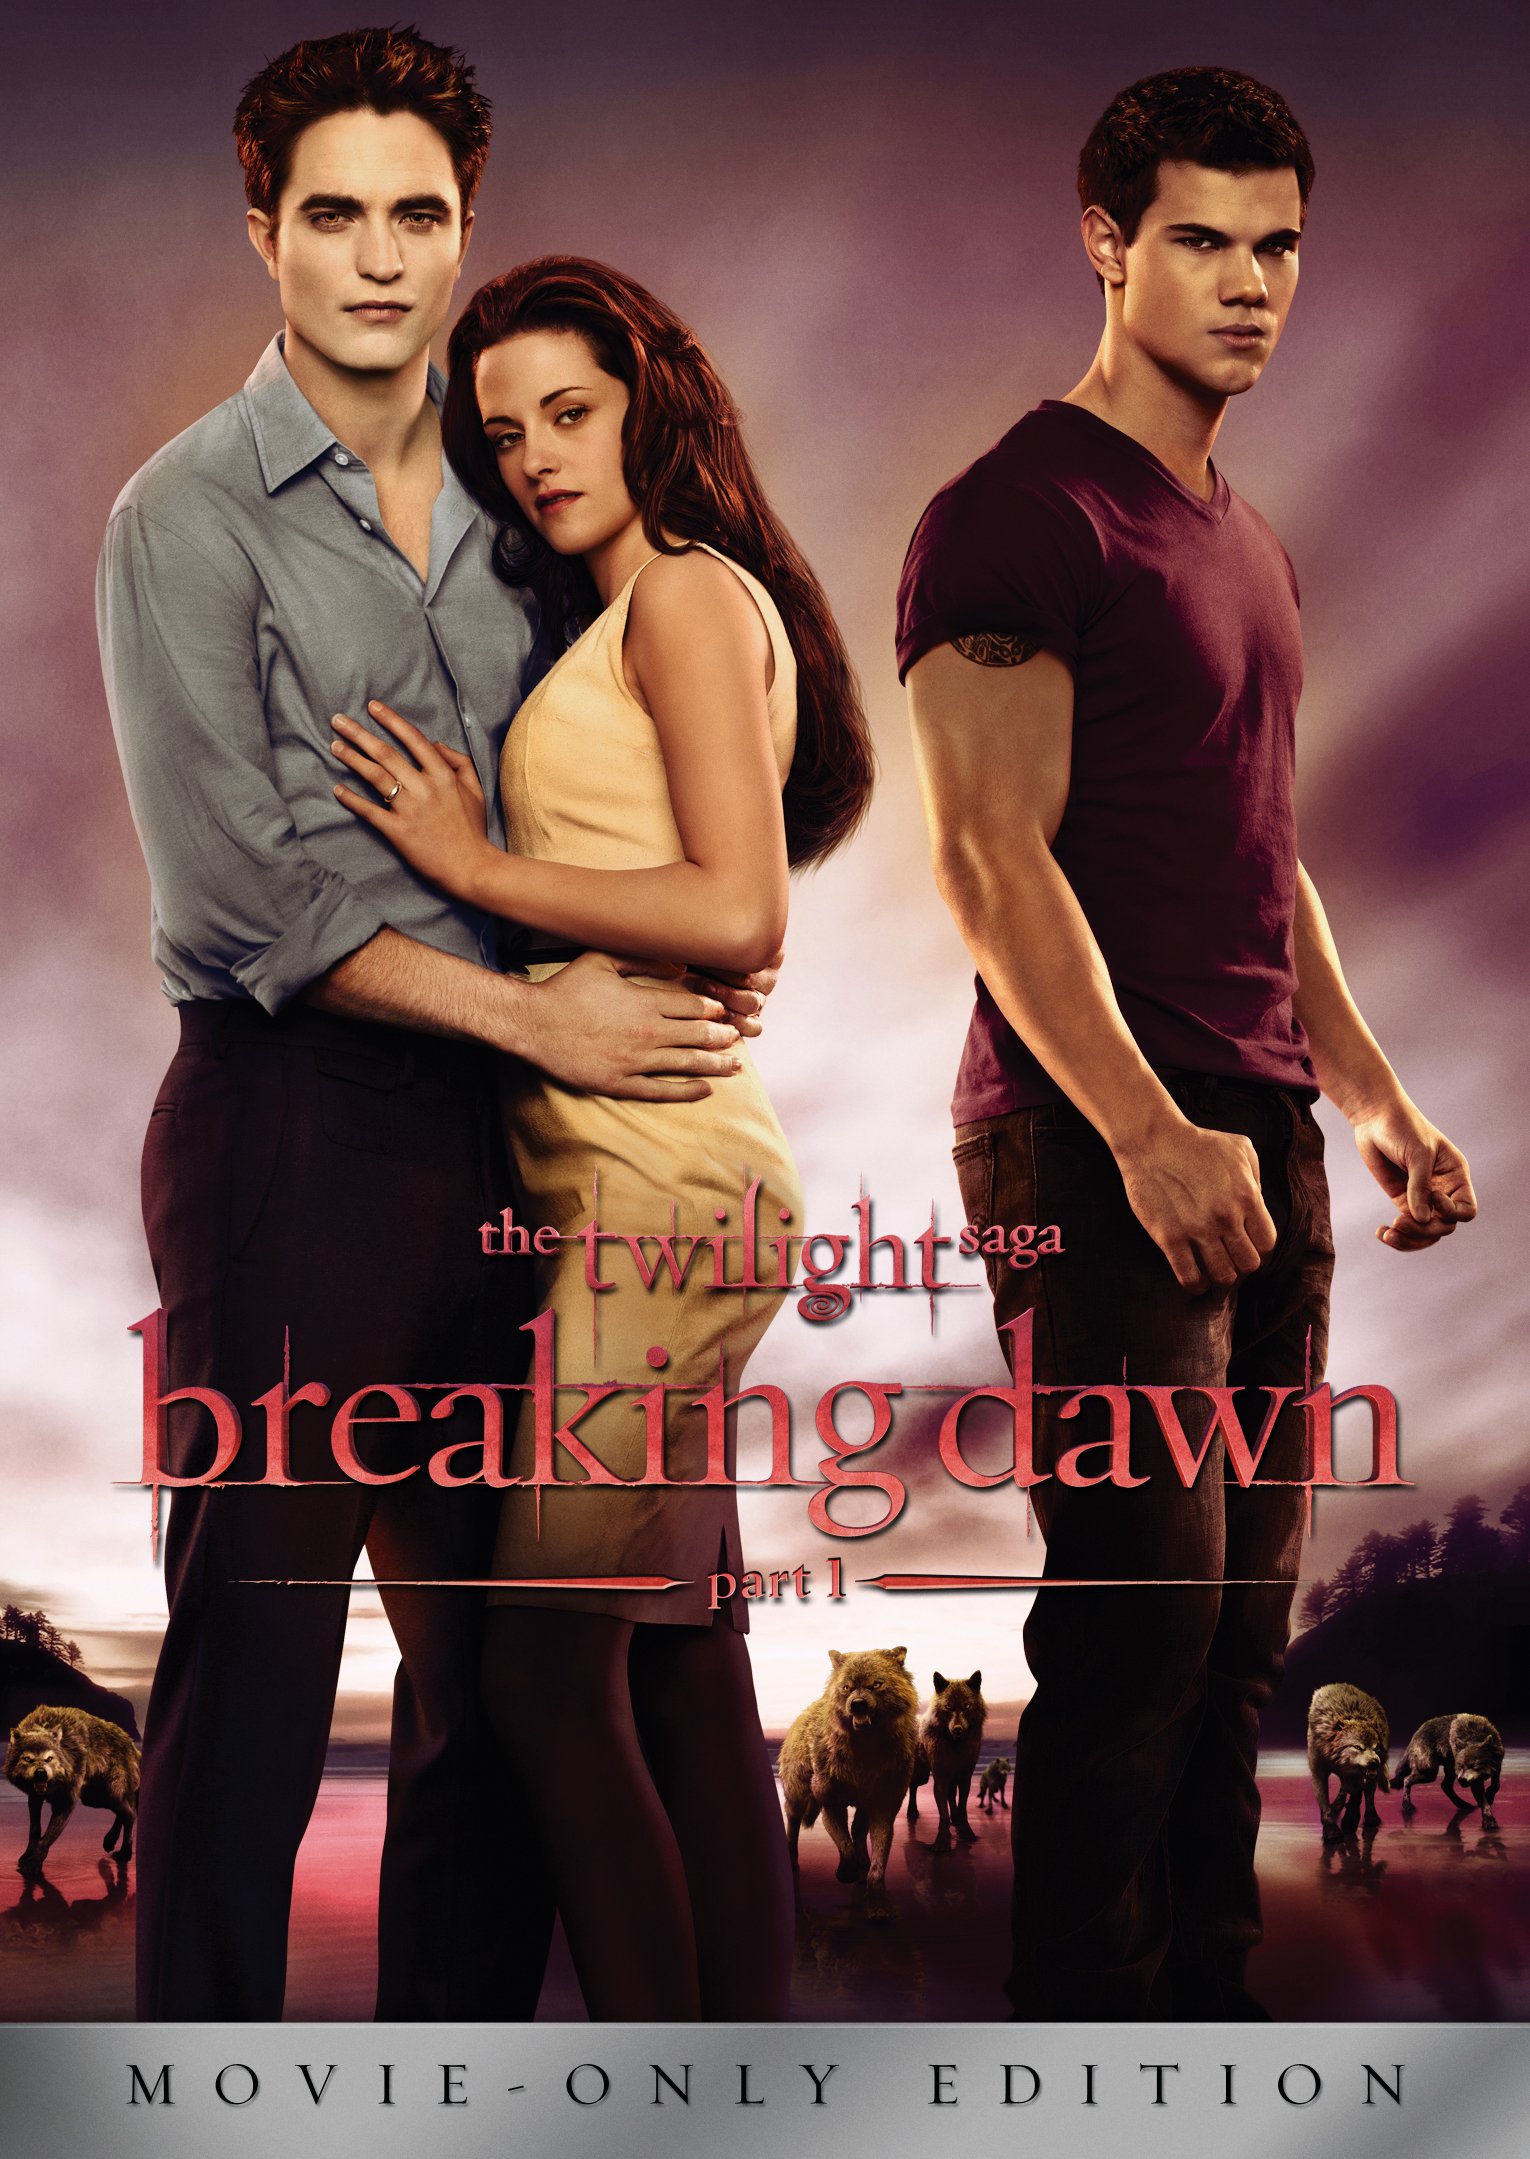 Nice Images Collection: The Twilight Saga: Breaking Dawn - Part 1 Desktop Wallpapers